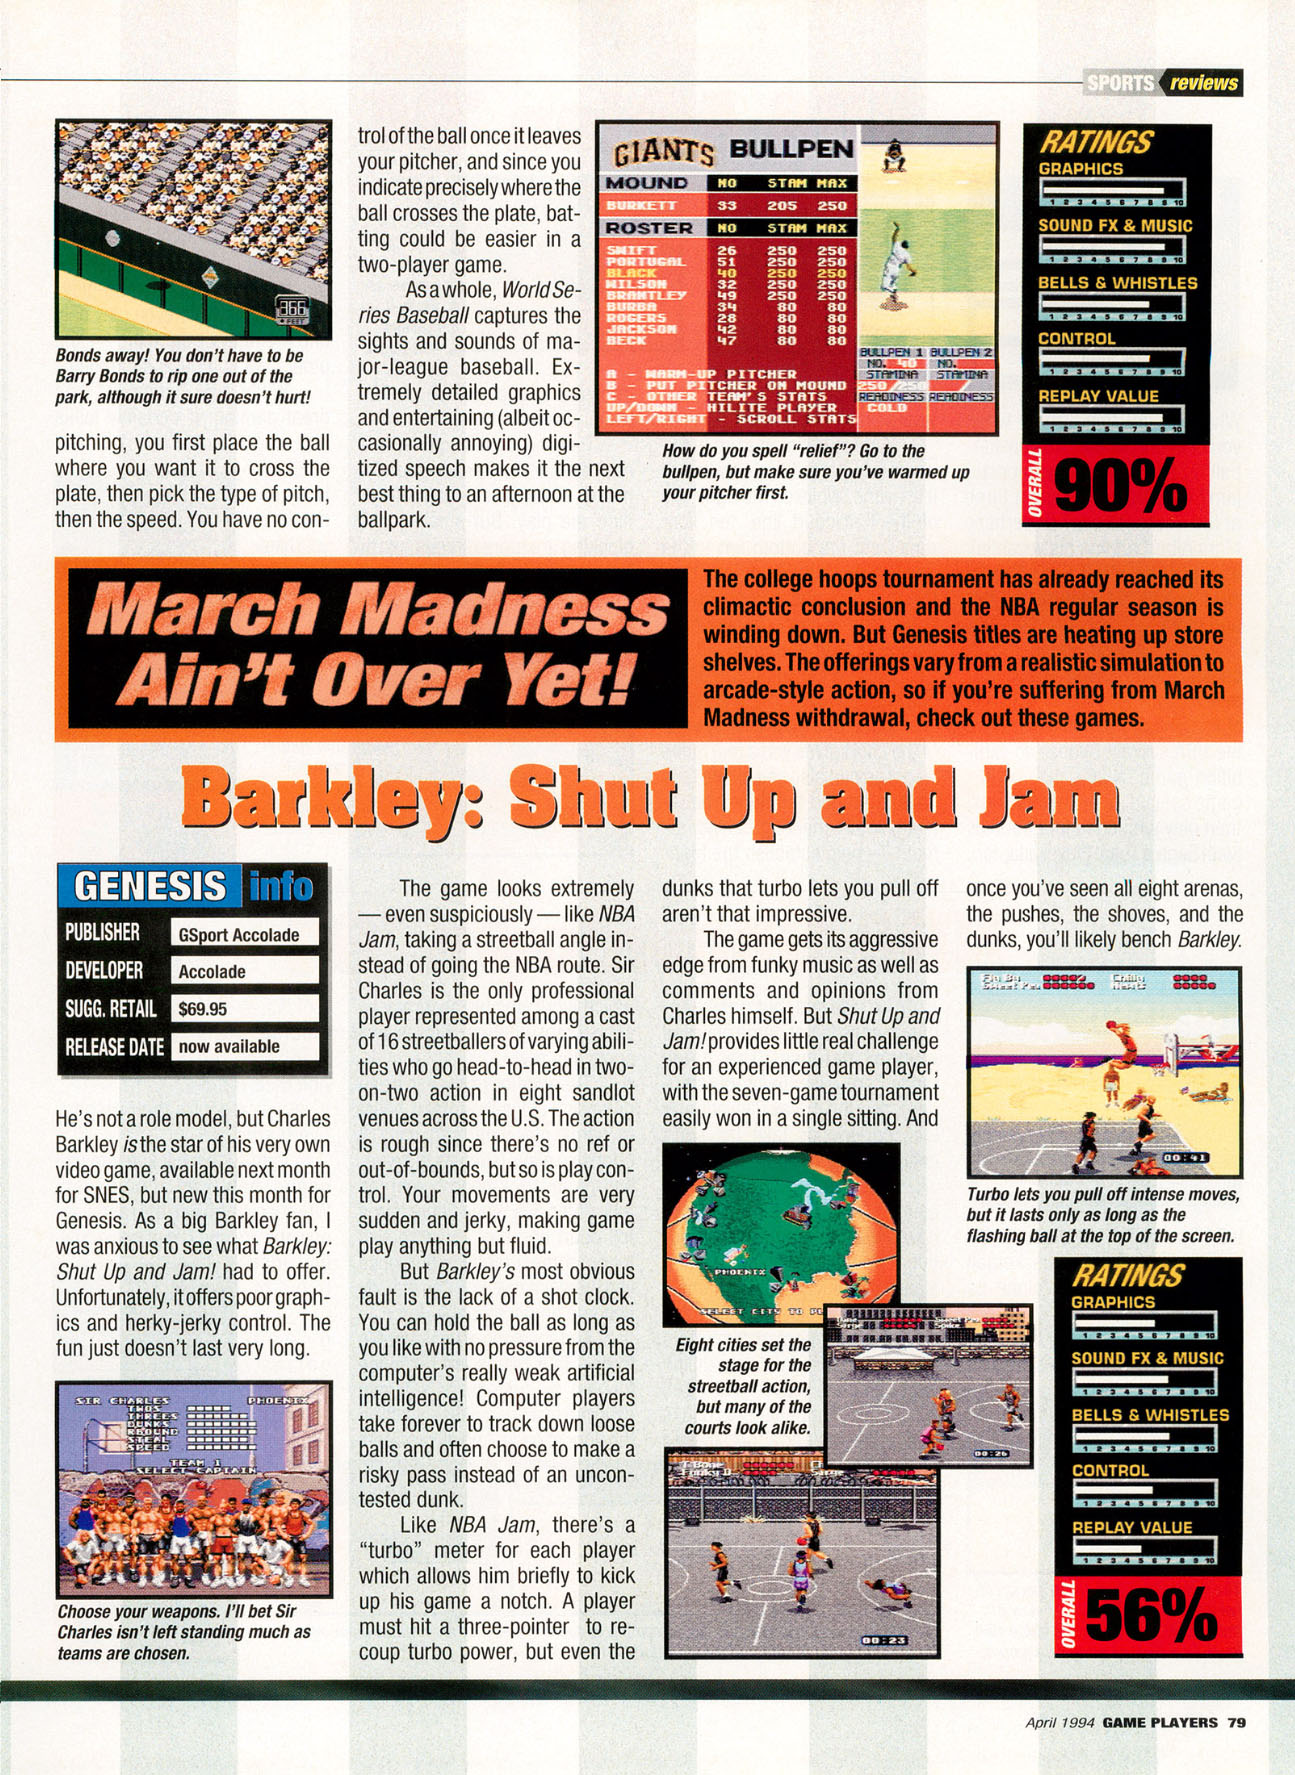 Play Ball!, Game Players April 1994 page 79